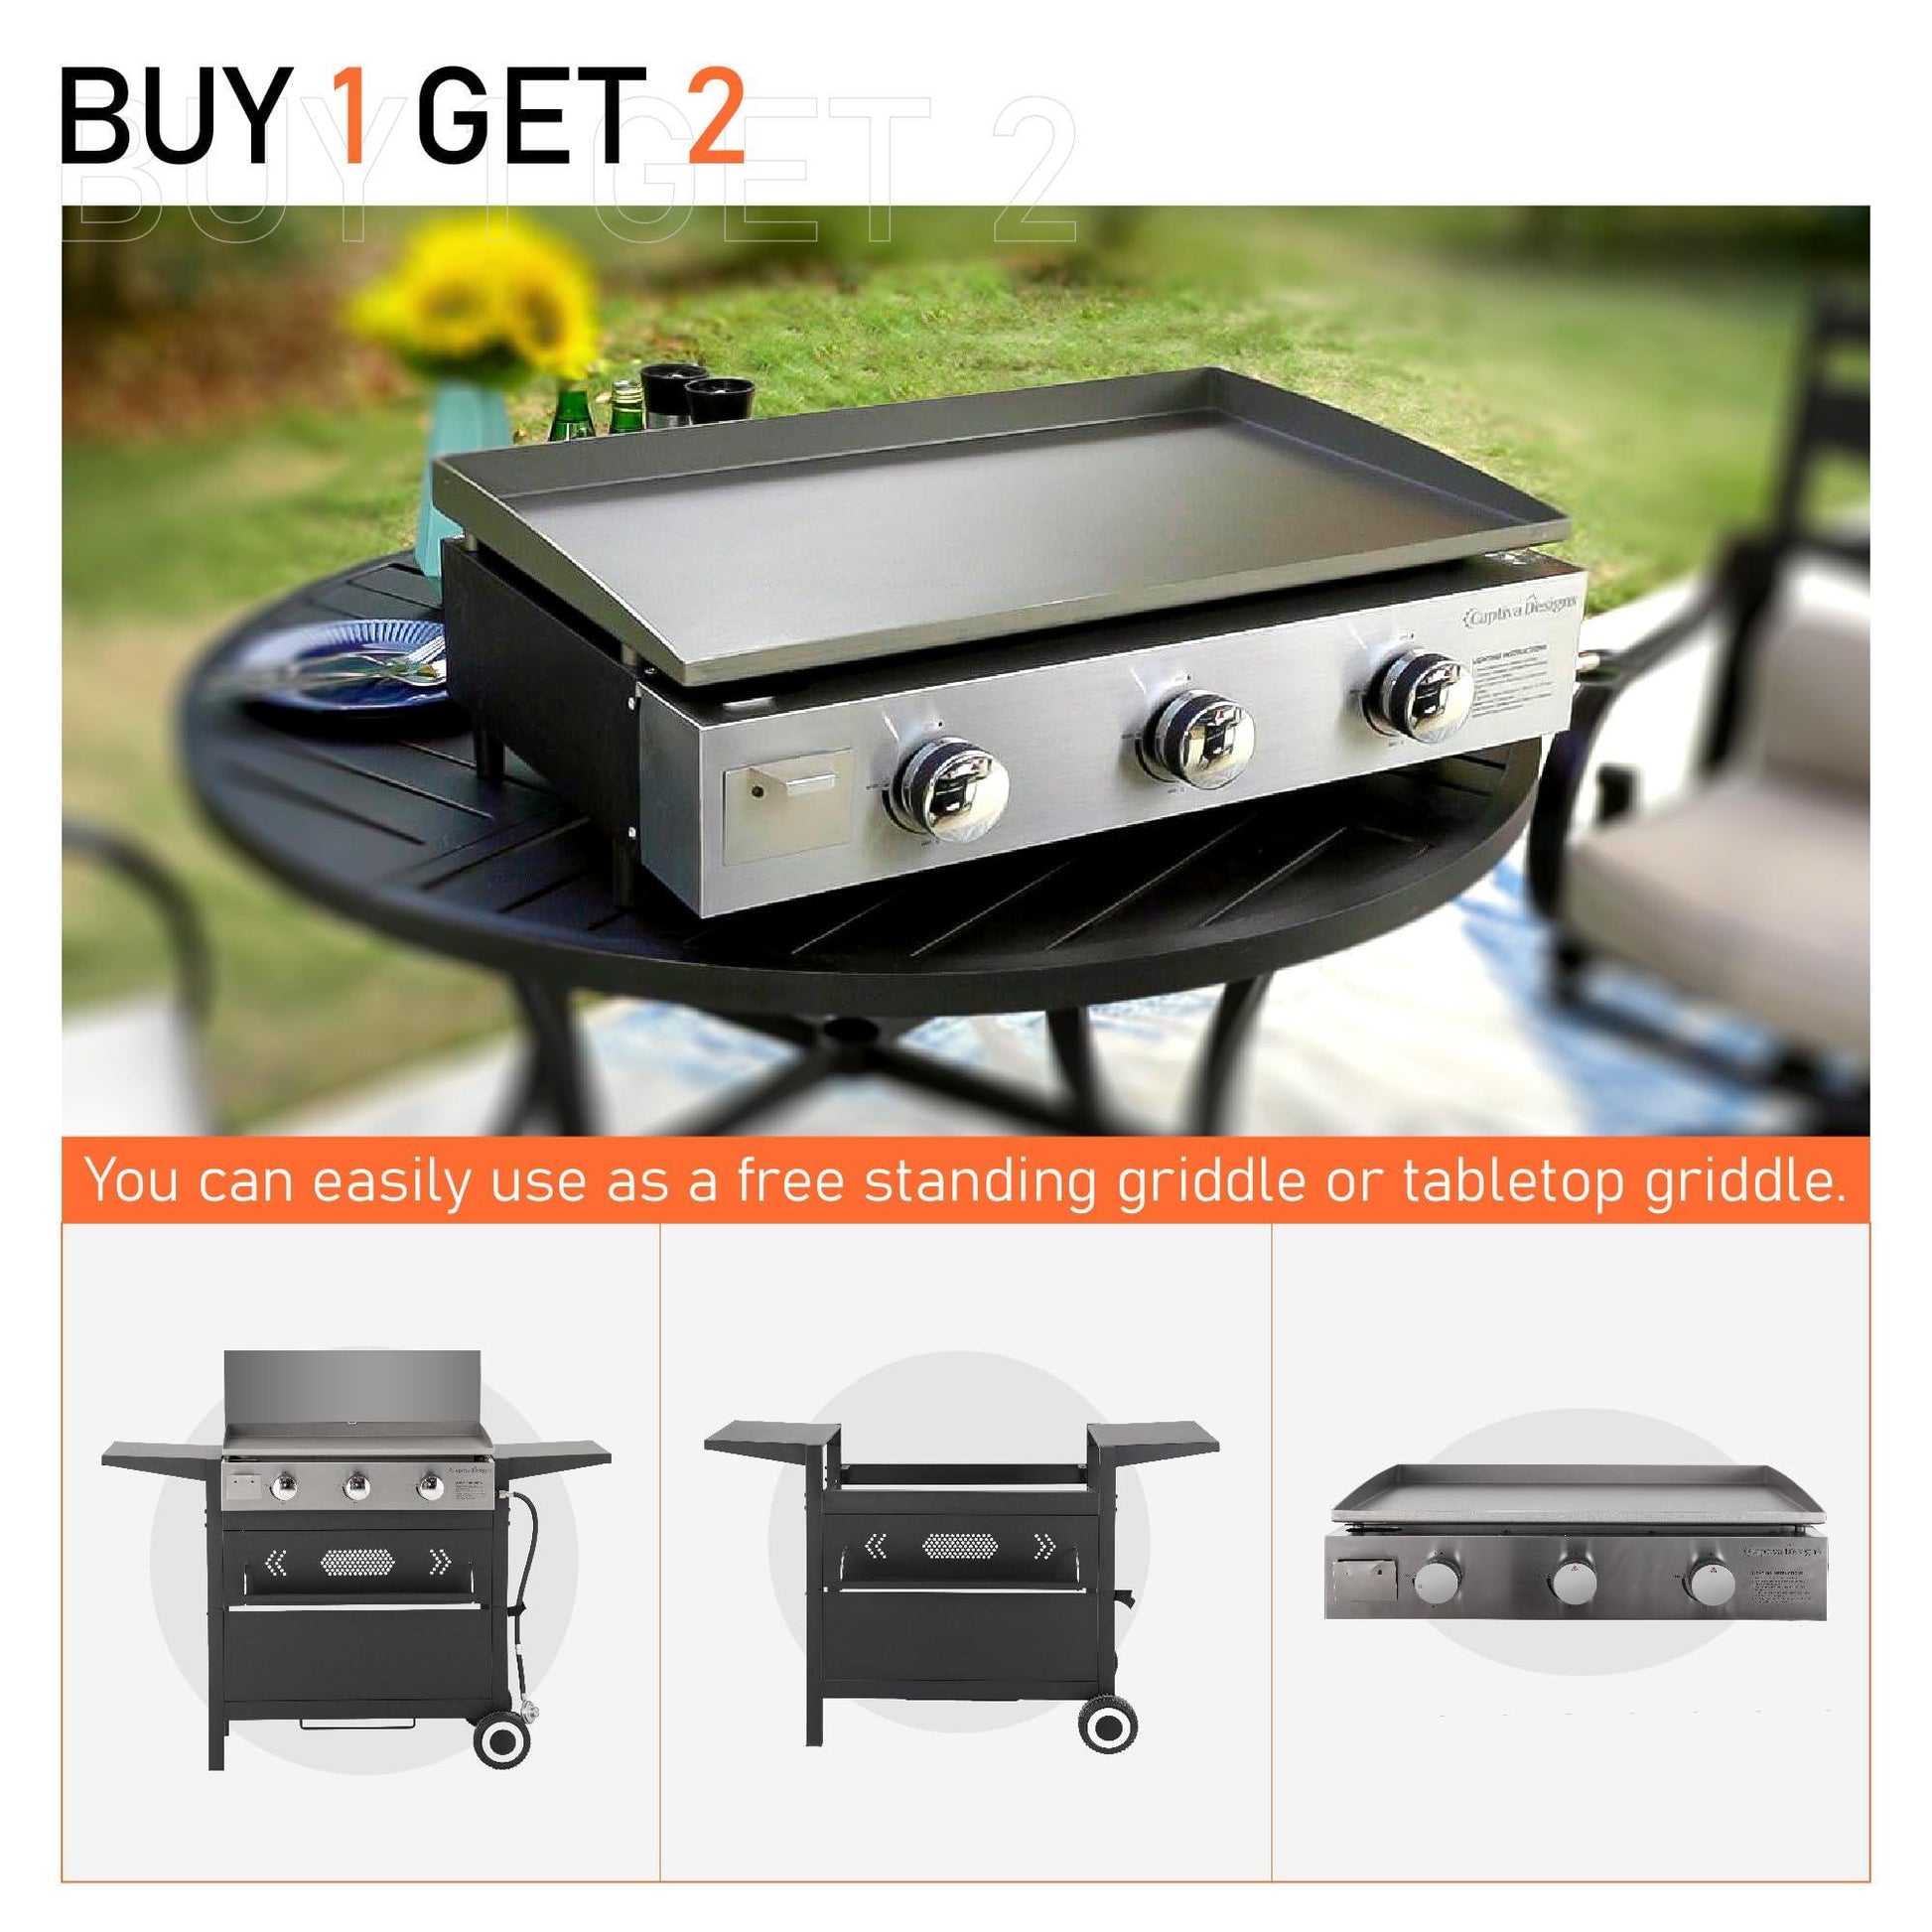 MFSTUDIO Flat Top Gas Griddle Grill with lid, 3 Burner Propane BBQ Grill Outdoor Cooking, Can be Used As a Table Top Griddle, for Camping, 33,000 BTU - CookCave